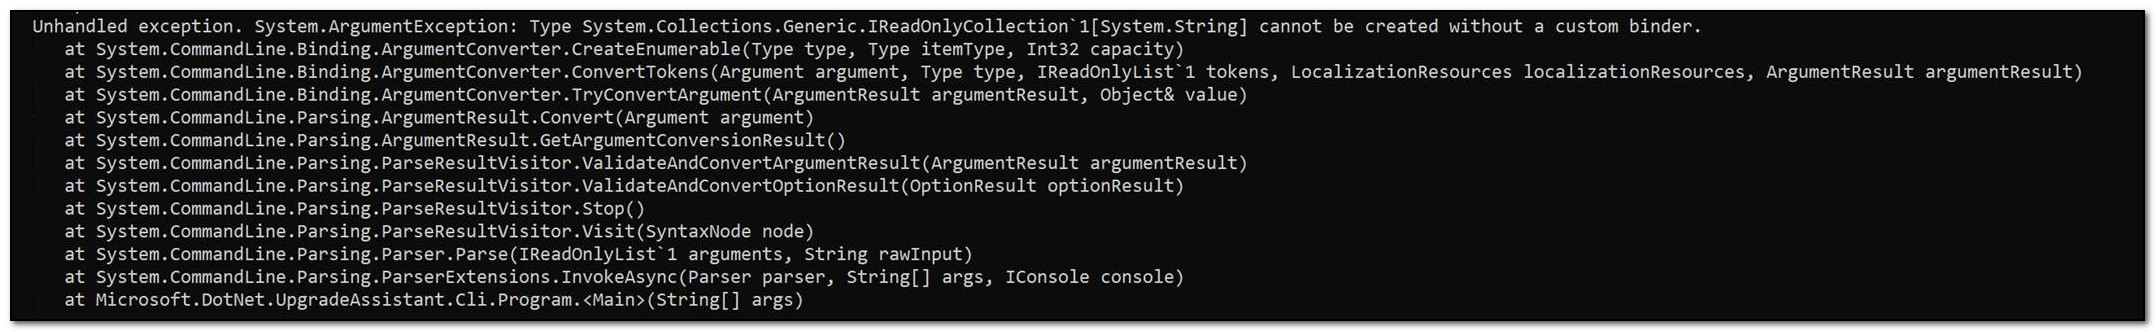 Unhandled exception. System.ArgumentException: Type System.Collections.Generic.IReadOnlyCollection`1[System.String] cannot be created without a custom binder.    at System.CommandLine.Binding.ArgumentConverter.CreateEnumerable(Type type, Type itemType, Int32 capacity)    at System.CommandLine.Binding.ArgumentConverter.ConvertTokens(Argument argument, Type type, IReadOnlyList`1 tokens, LocalizationResources localizationResources, ArgumentResult argumentResult)    at System.CommandLine.Binding.ArgumentConverter.TryConvertArgument(ArgumentResult argumentResult, Object& value)    at System.CommandLine.Parsing.ArgumentResult.Convert(Argument argument)    at System.CommandLine.Parsing.ArgumentResult.GetArgumentConversionResult()    at System.CommandLine.Parsing.ParseResultVisitor.ValidateAndConvertArgumentResult(ArgumentResult argumentResult)    at System.CommandLine.Parsing.ParseResultVisitor.ValidateAndConvertOptionResult(OptionResult optionResult)    at System.CommandLine.Parsing.ParseResultVisitor.Stop()    at System.CommandLine.Parsing.ParseResultVisitor.Visit(SyntaxNode node)    at System.CommandLine.Parsing.Parser.Parse(IReadOnlyList`1 arguments, String rawInput)    at System.CommandLine.Parsing.ParserExtensions.InvokeAsync(Parser parser, String[] args, IConsole console)    at Microsoft.DotNet.UpgradeAssistant.Cli.Program.<Main>(String[] args)